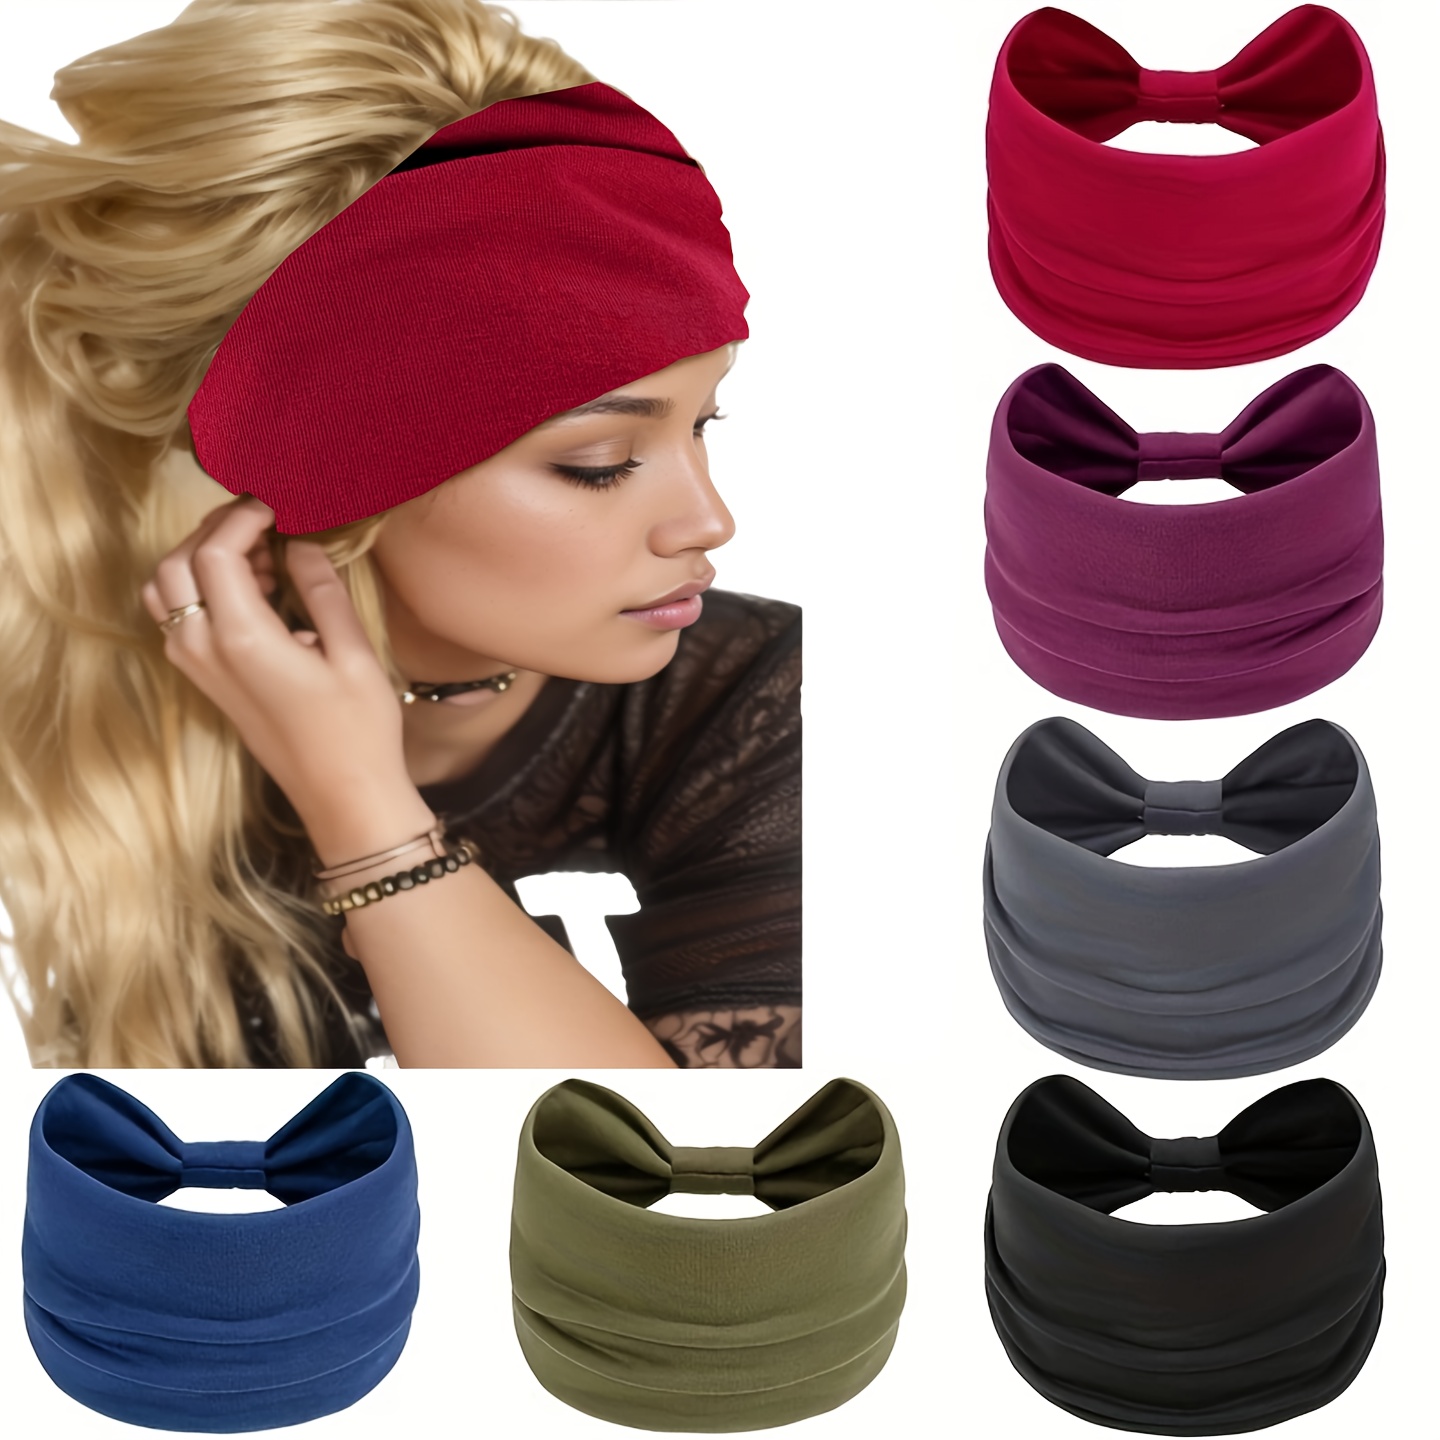 

6pcs/pack Women's Wide Headbands, Solid Color Knot Turban, Large Bohemian Style Hair Accessories, Multi-functional Head Wraps For Yoga, Running, And Sports